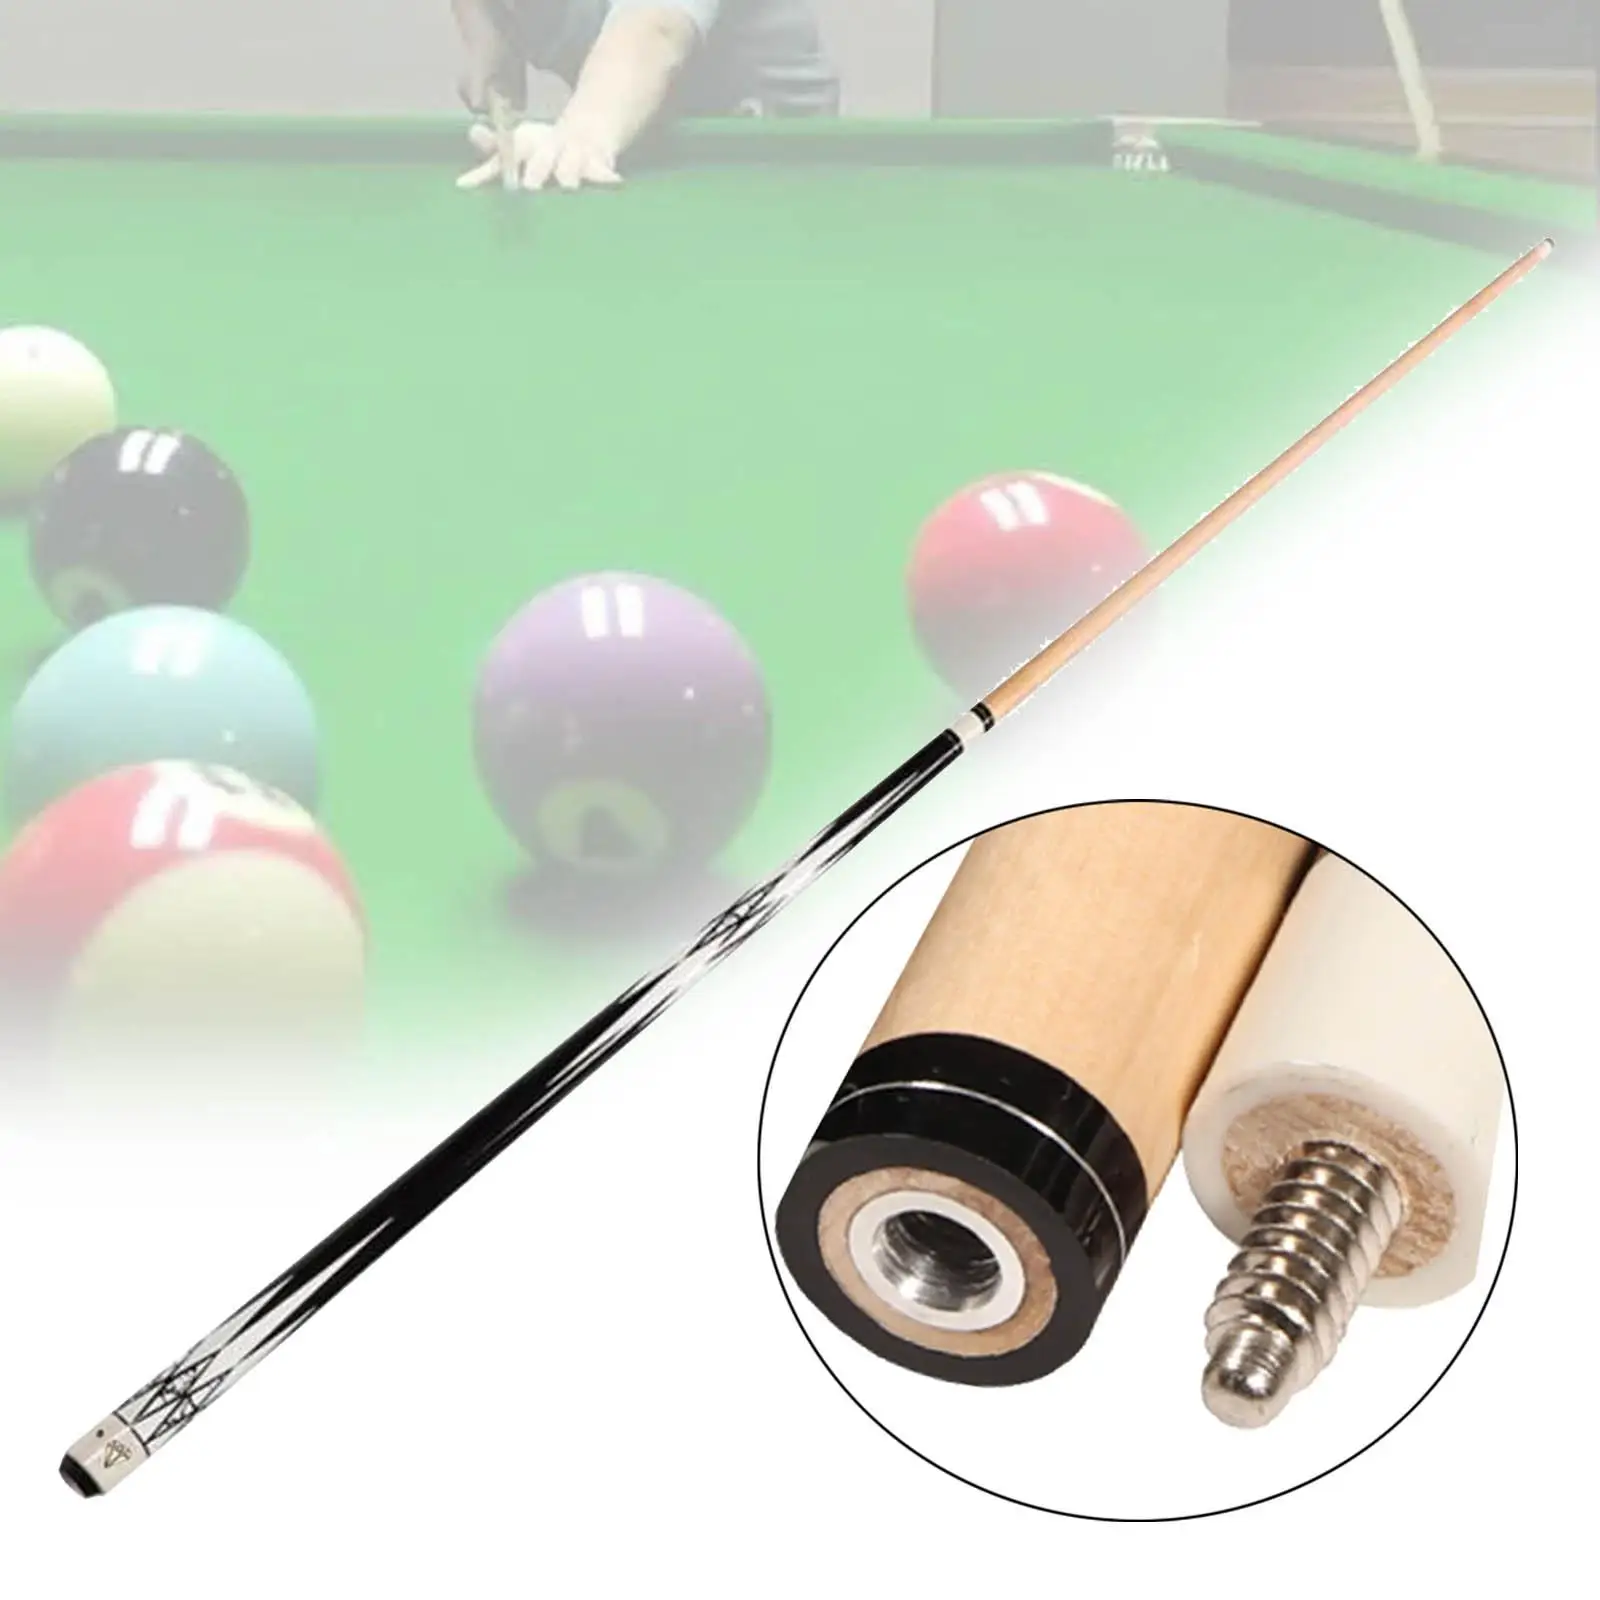 Billiard/Pool Cue White Ferrule 145cm Two Section Man Cave Gift Snooker Cue